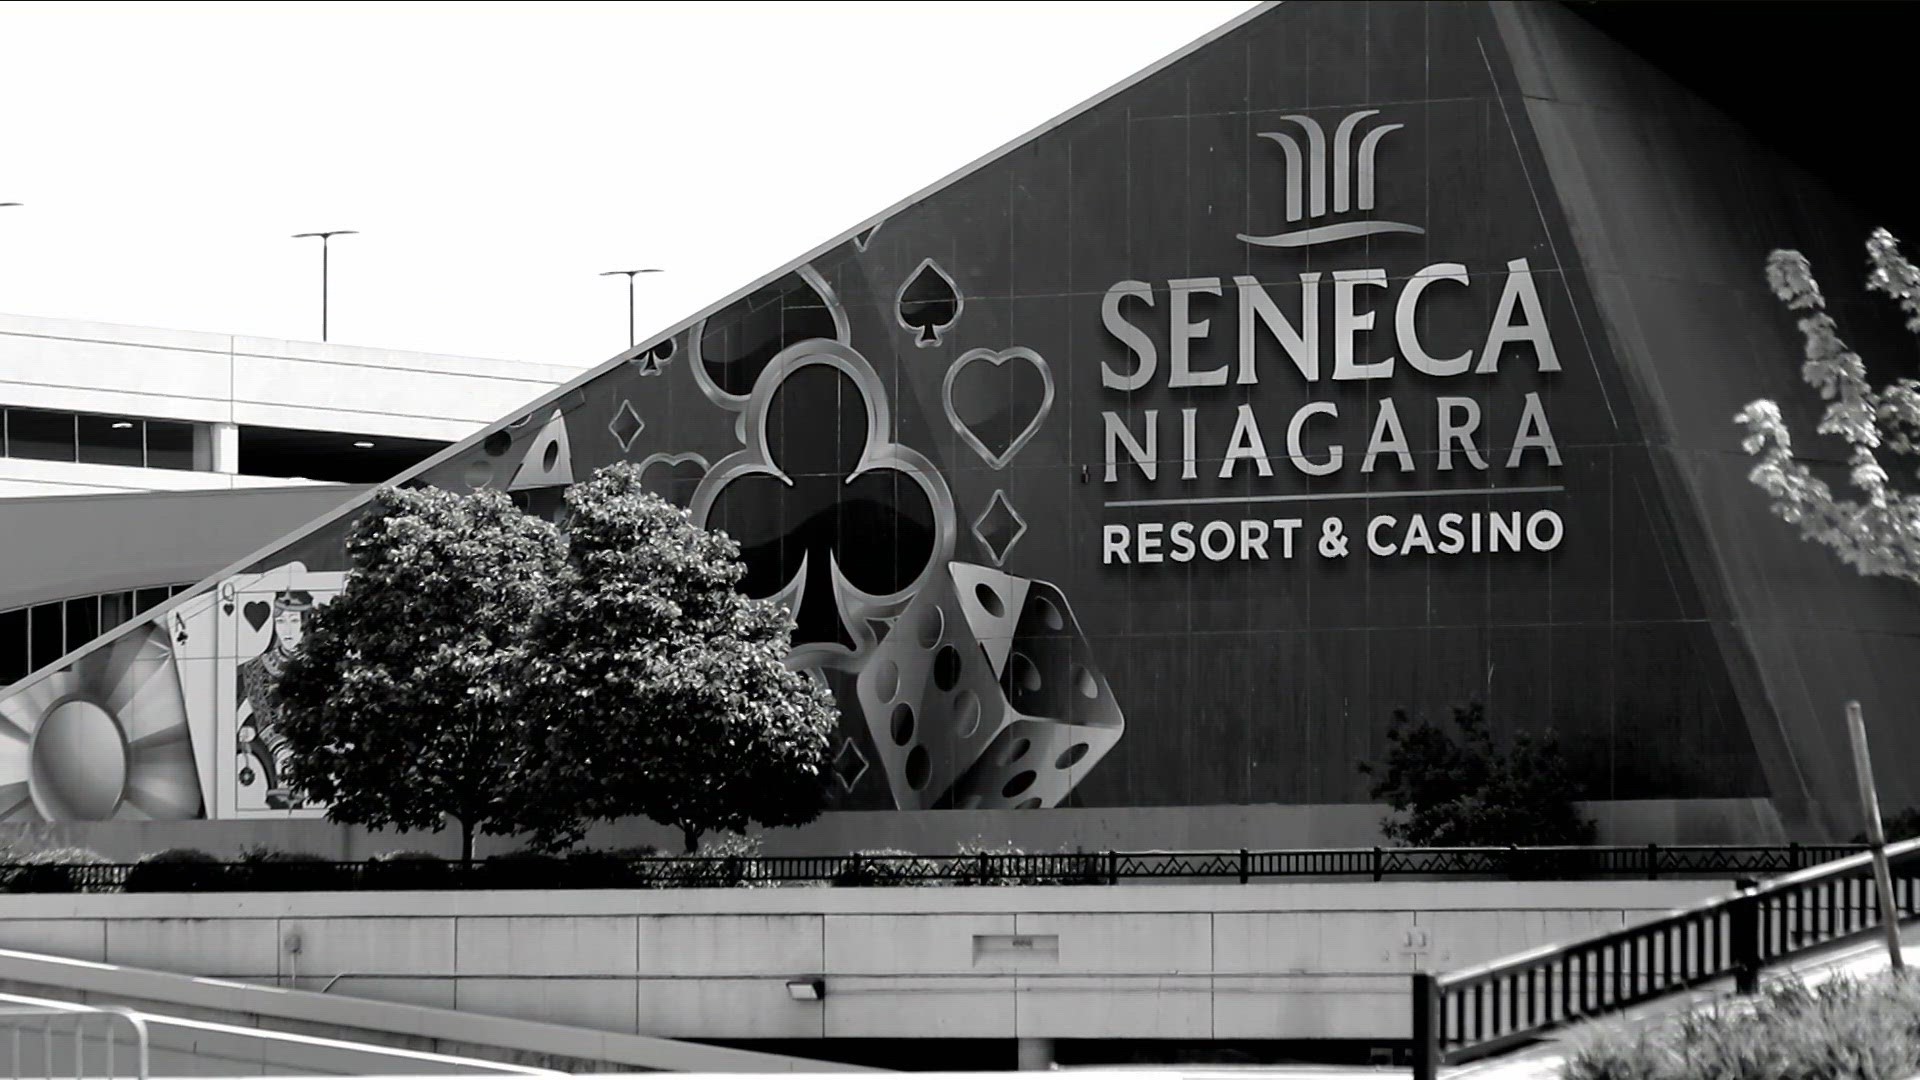 A proposed casino in Rochester is now off the table as the Senecas negotiate a new gaming compact